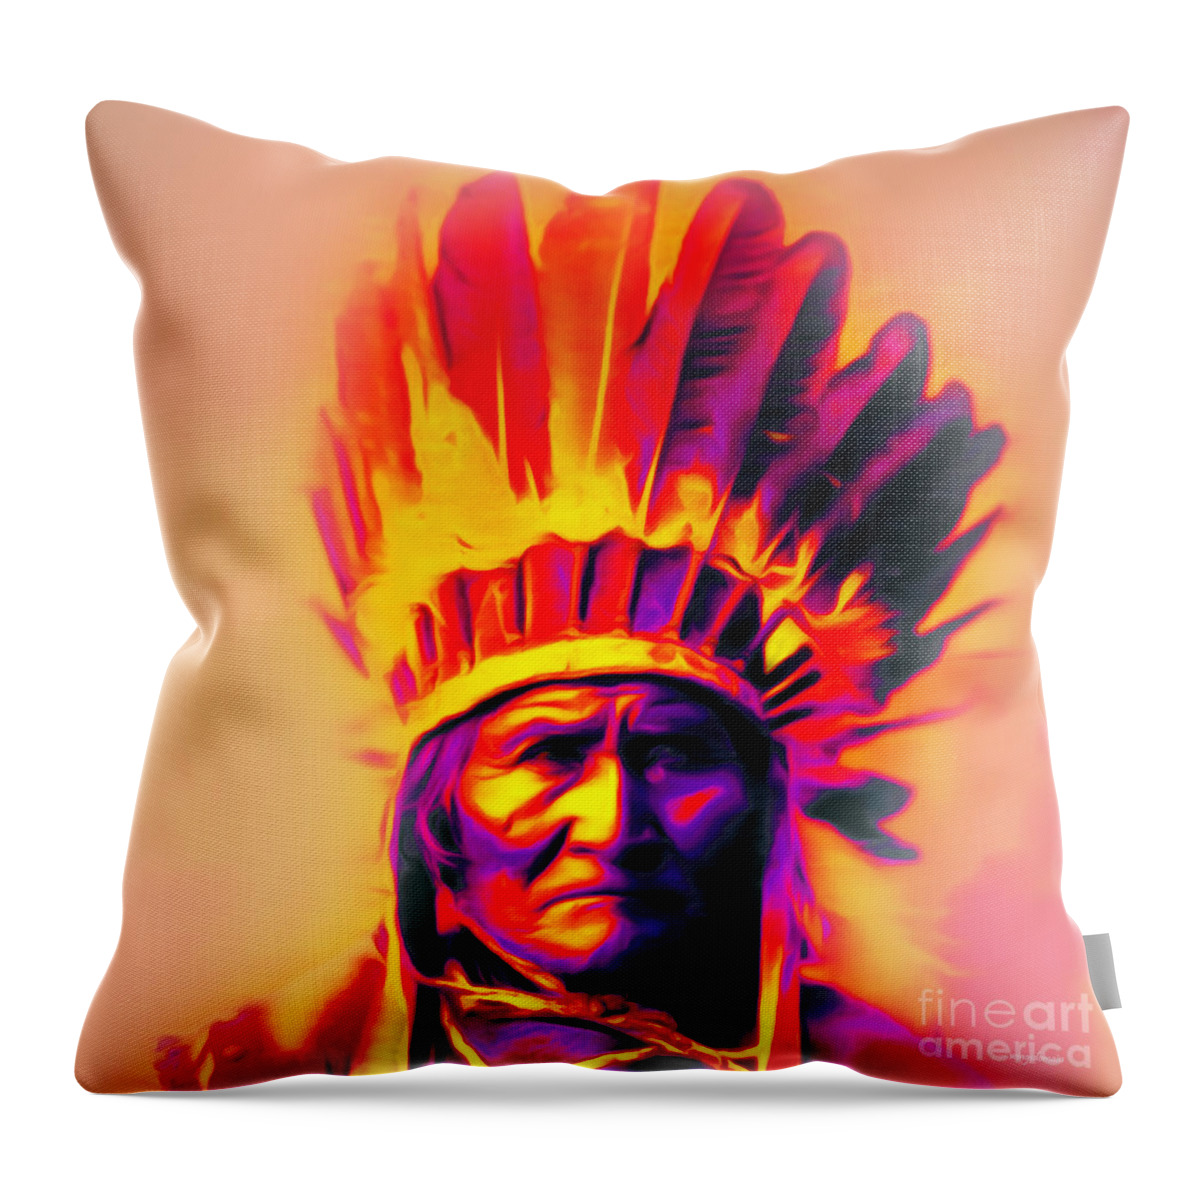 Celebrity Throw Pillow featuring the photograph Chief Geronimo 20151228 #1 by Wingsdomain Art and Photography